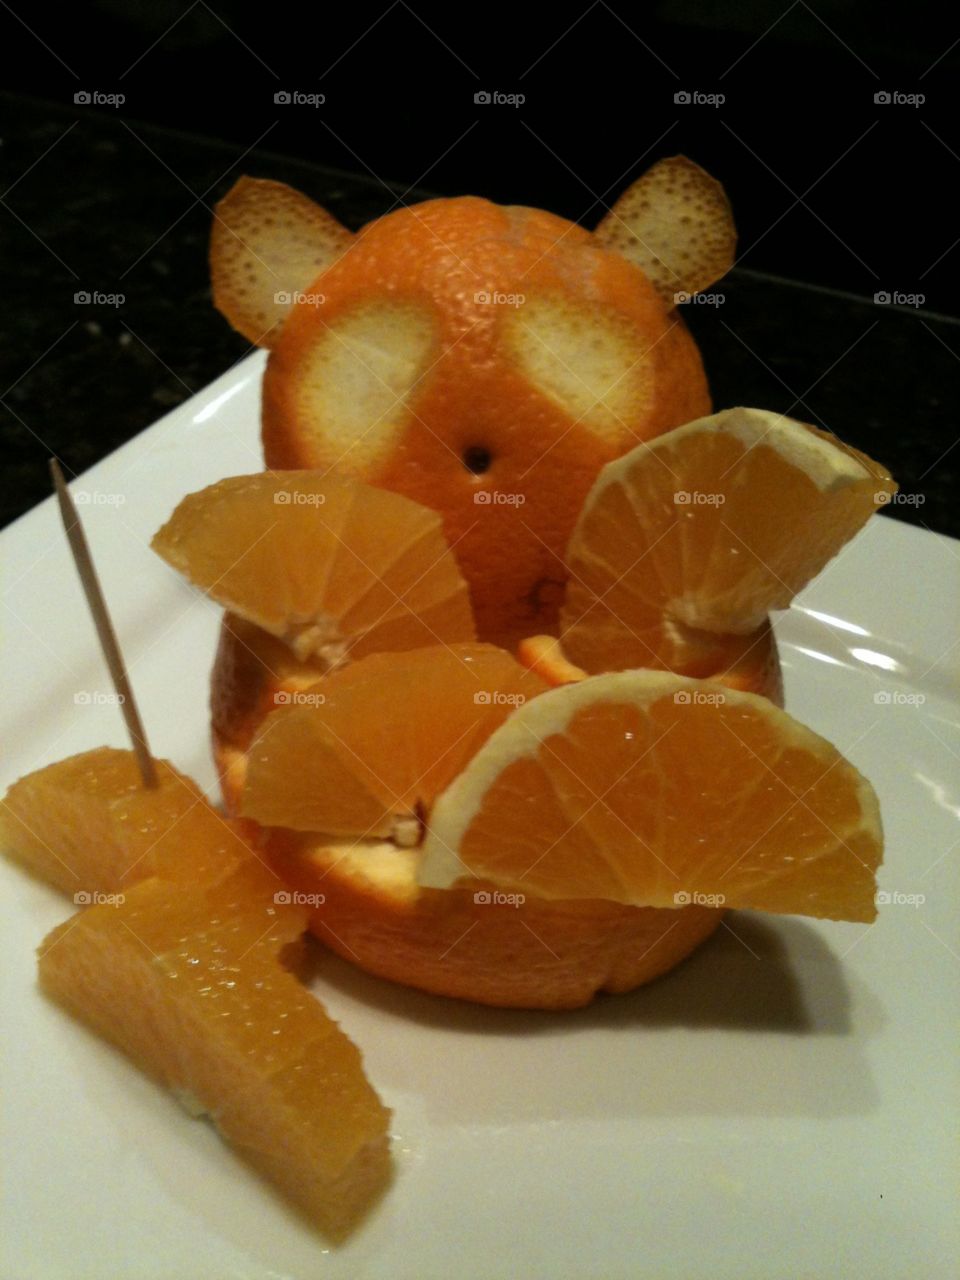 Bear made out of oranges